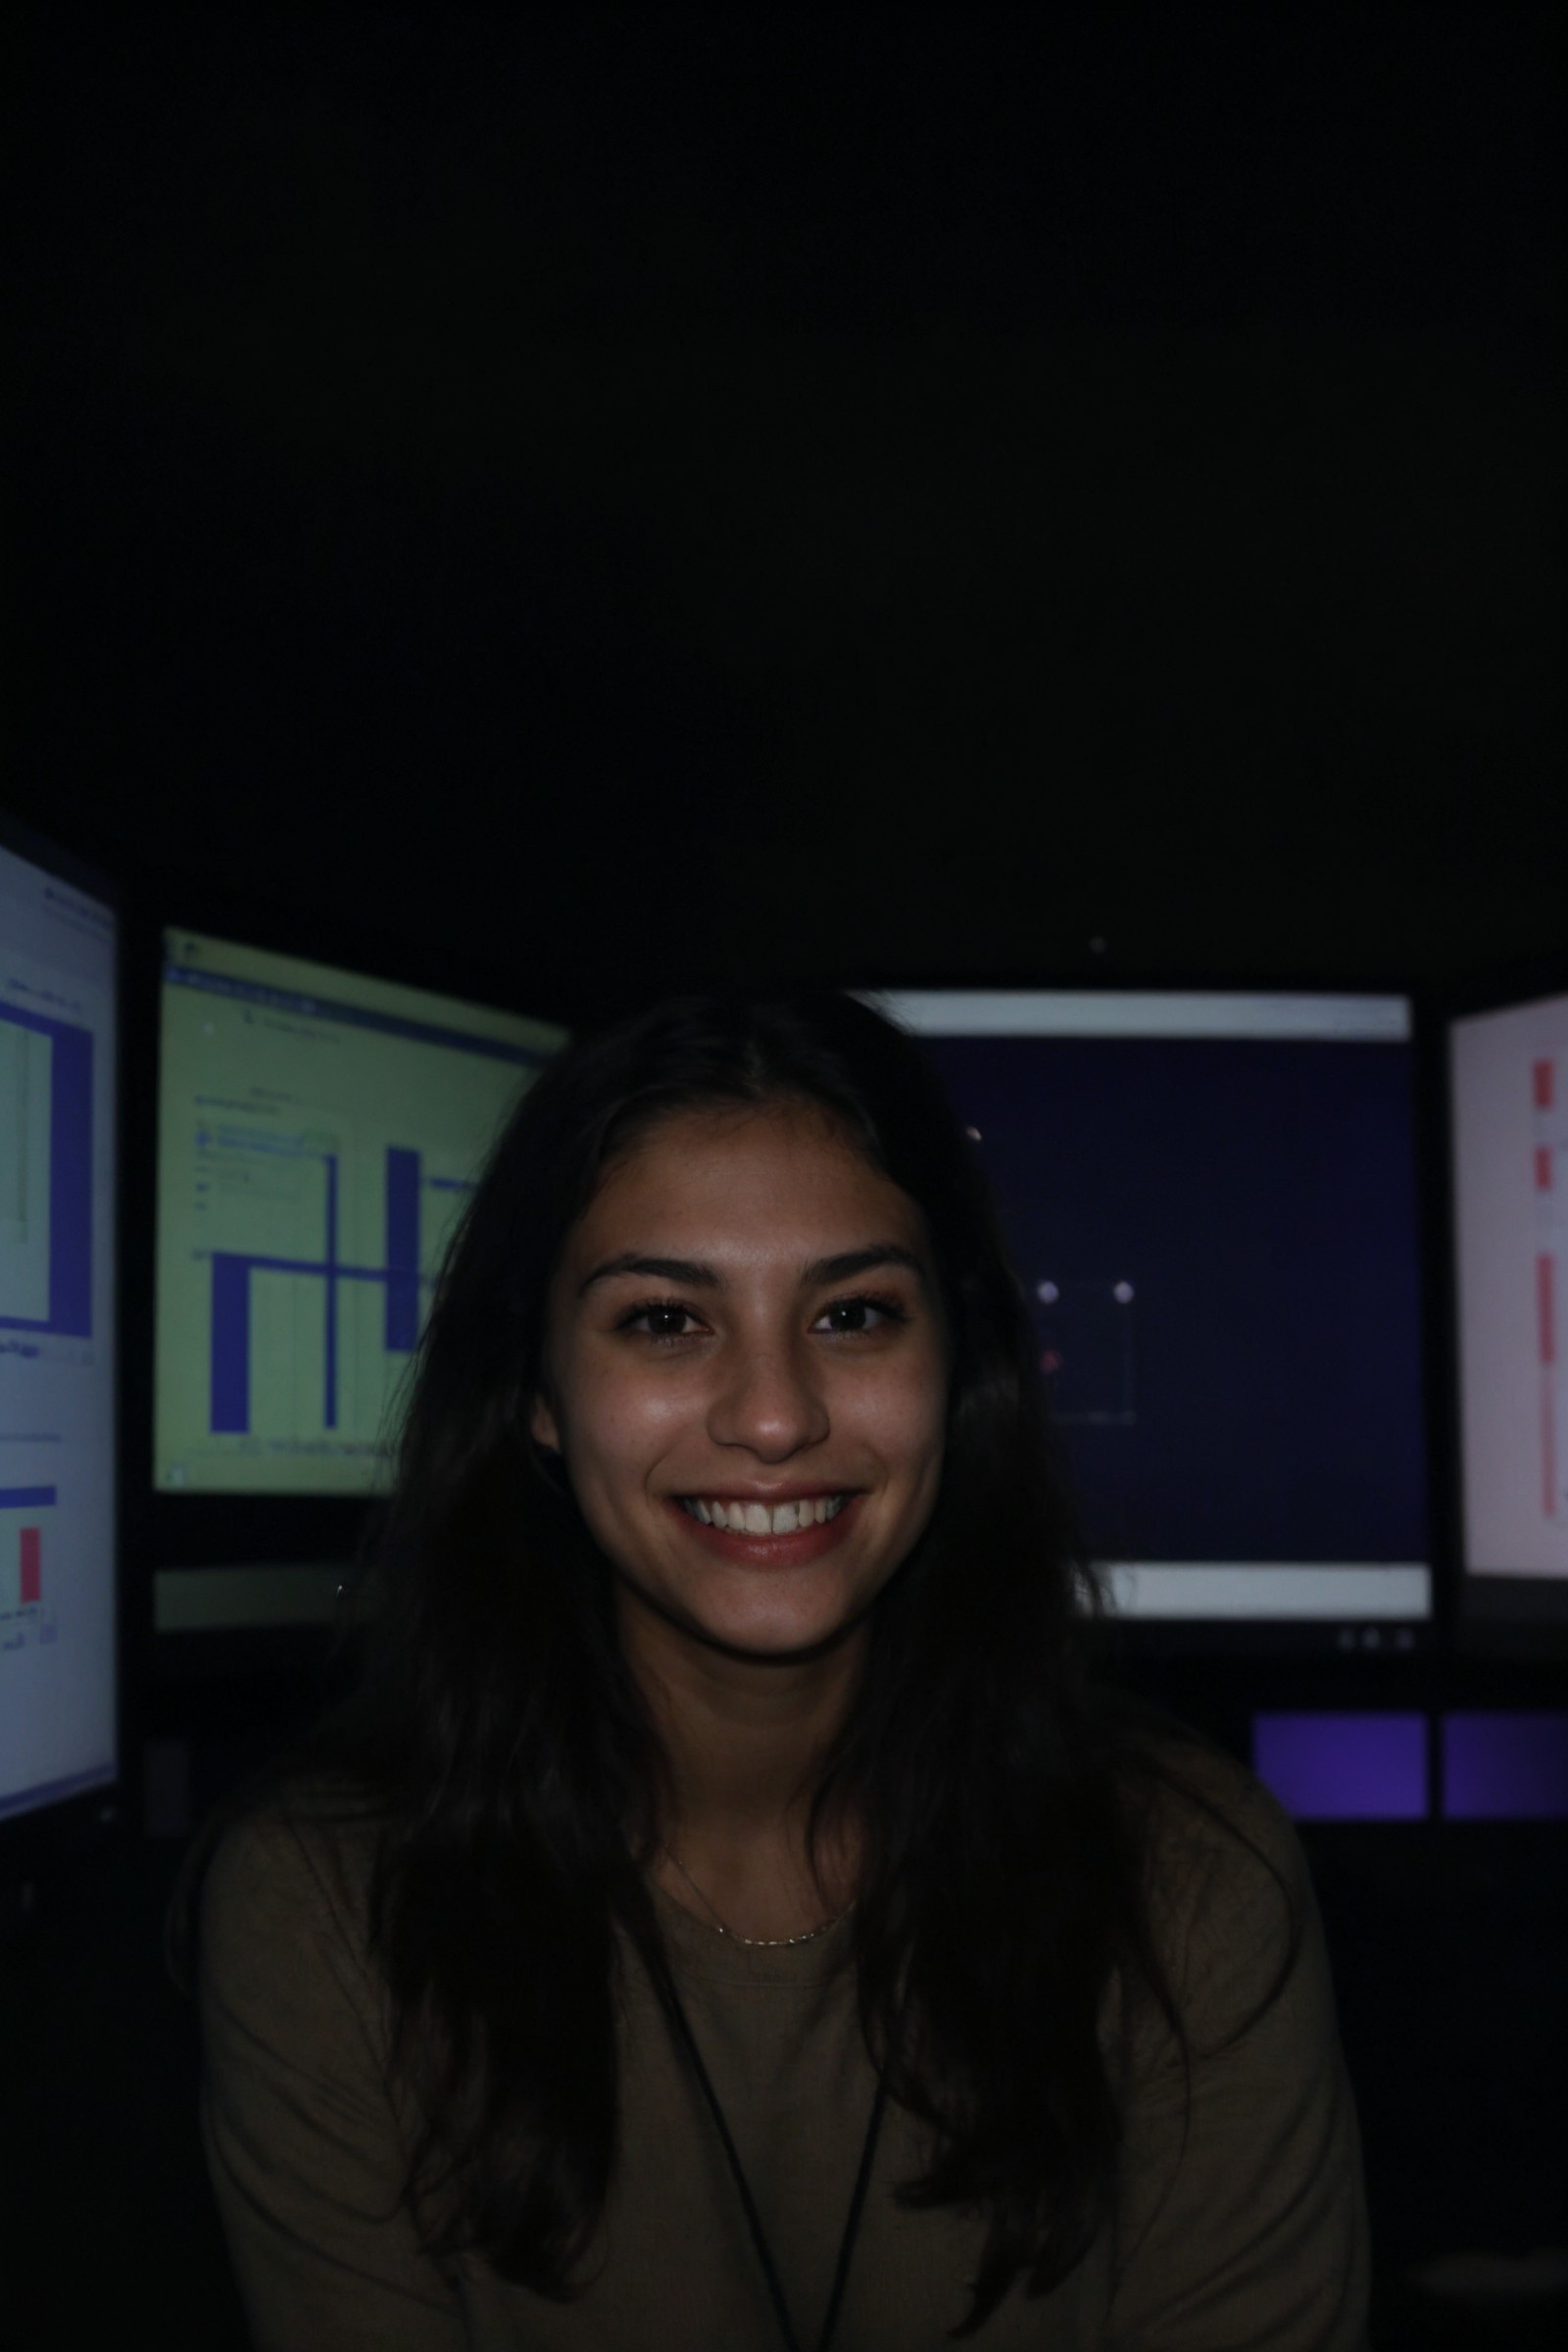 A female social worker having fun in a dark room surrounded by computer screens, poor quality photo, blurry, (smiling:0.5)...